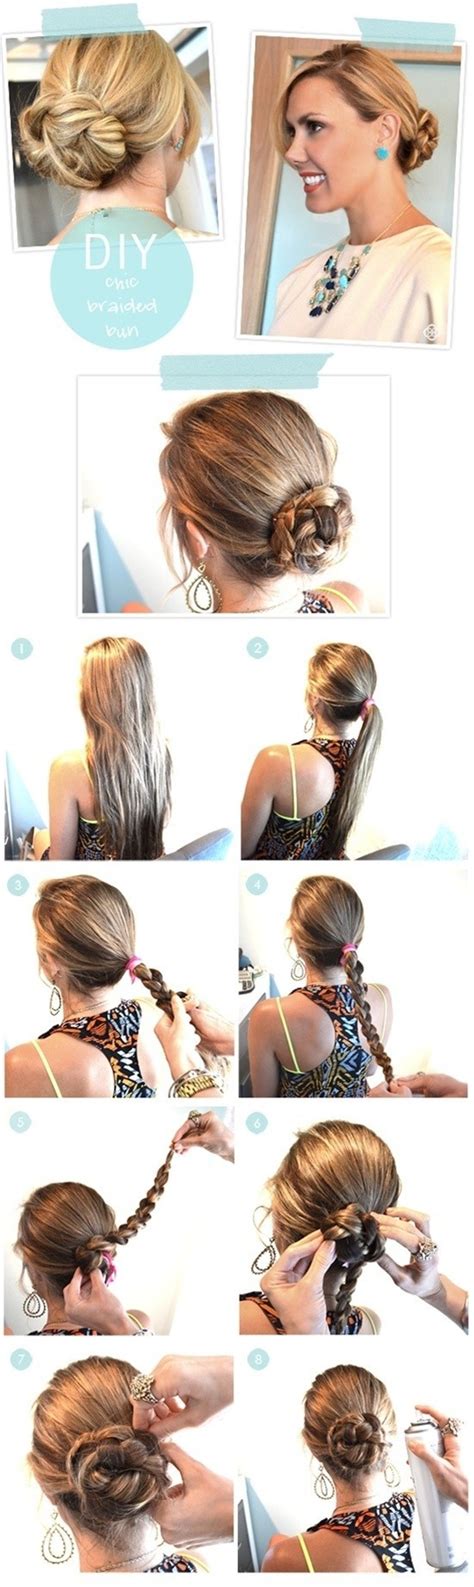 I try to make my videos informative, creative and most importantly entertaining. 10 tips for easy diy updos for short hair | Hair Style and ...